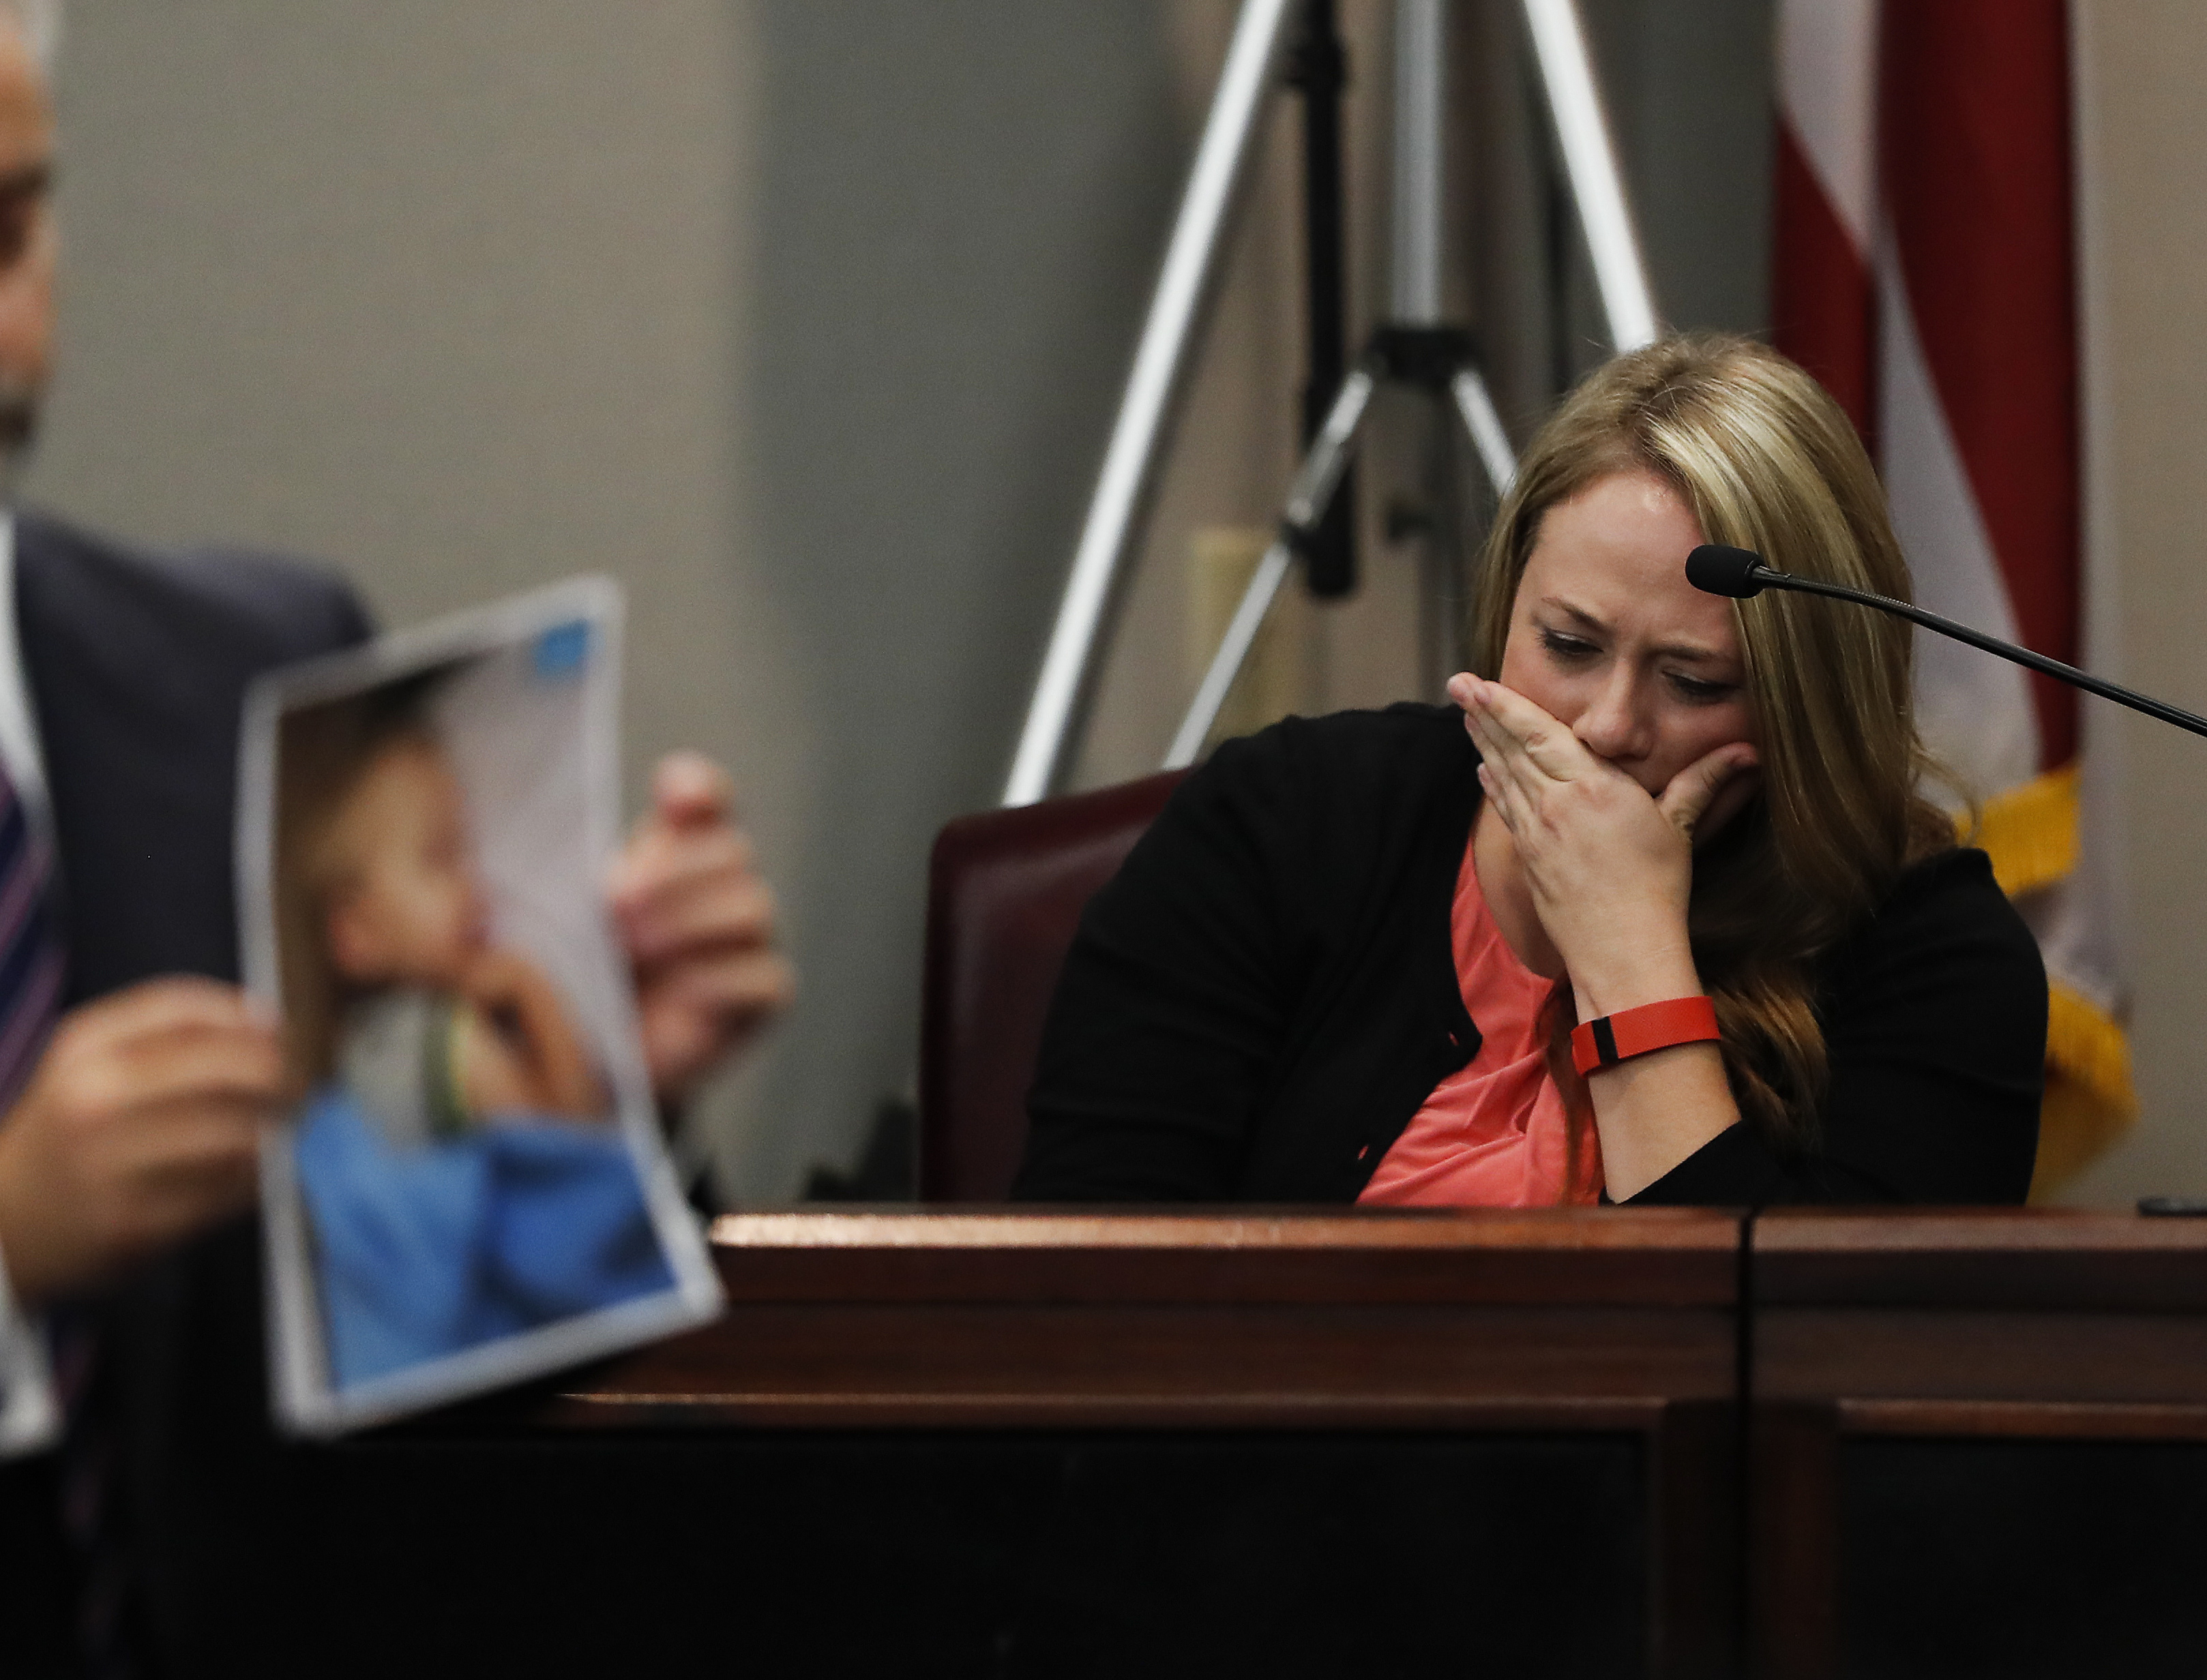 Leanna Taylor cries as an attorney shows photographs of her son Cooper to the jury during a murder trial for her ex-husband Justin Ross Harris, on Oct. 31, 2016, in Brunswick, Ga. (John Bazemore—AP)